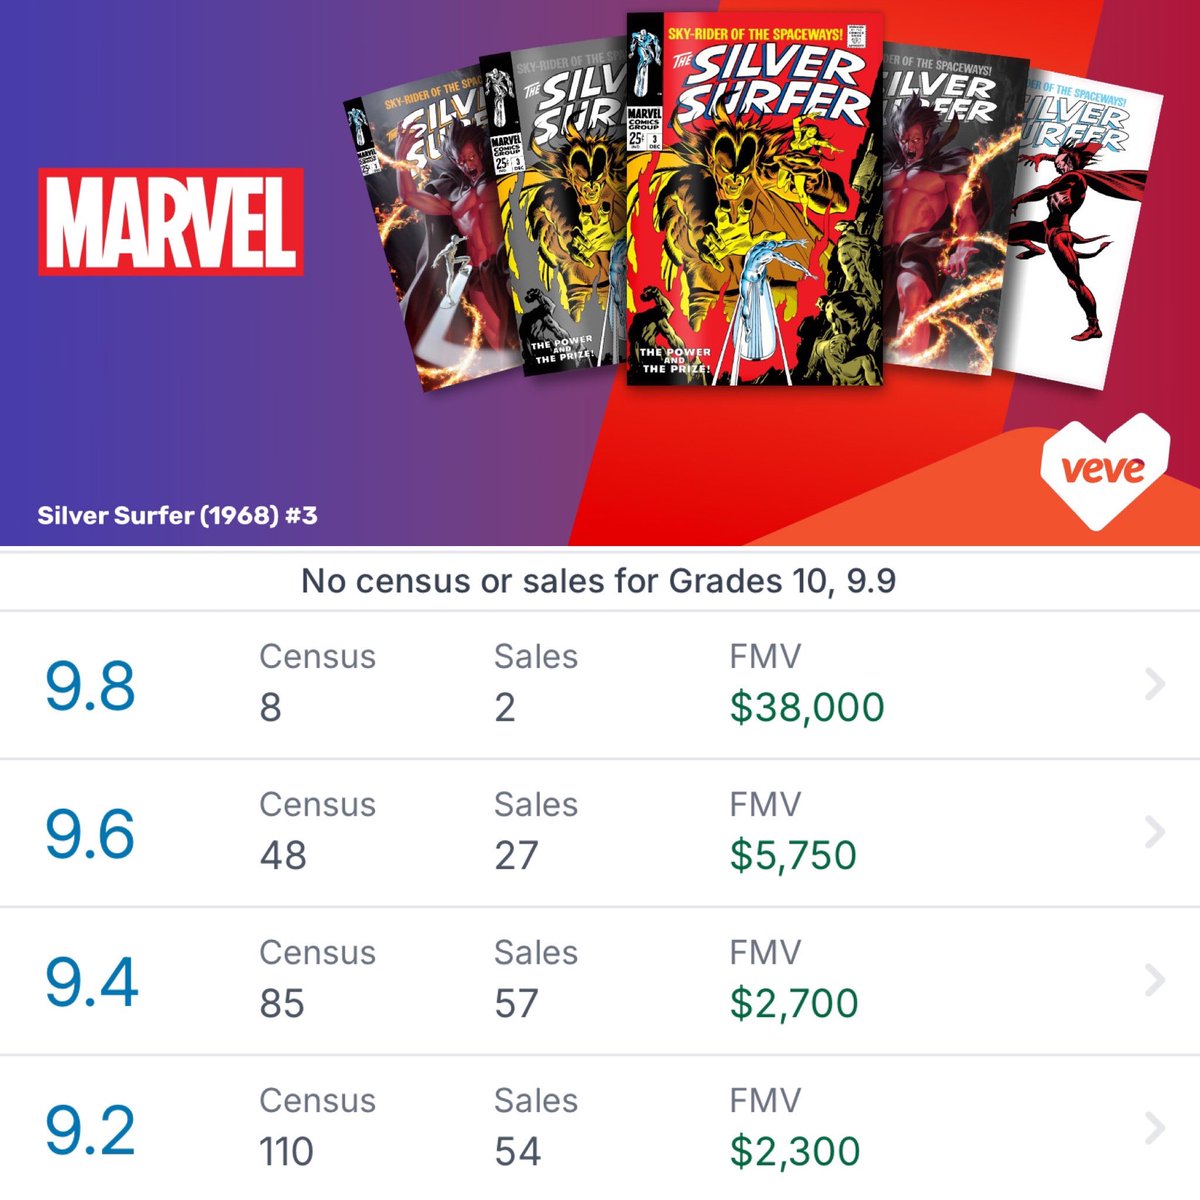 Silver Surfer #3 (FA Mephisto) dropped today on @veve_official! 

According to @gocollect, there are 3,534 CGC graded blue labels and the most recent sale for the physical comic (in its highest grade - CGC 9.8 grade), was for $55,200 @HeritageAuction in 2022.